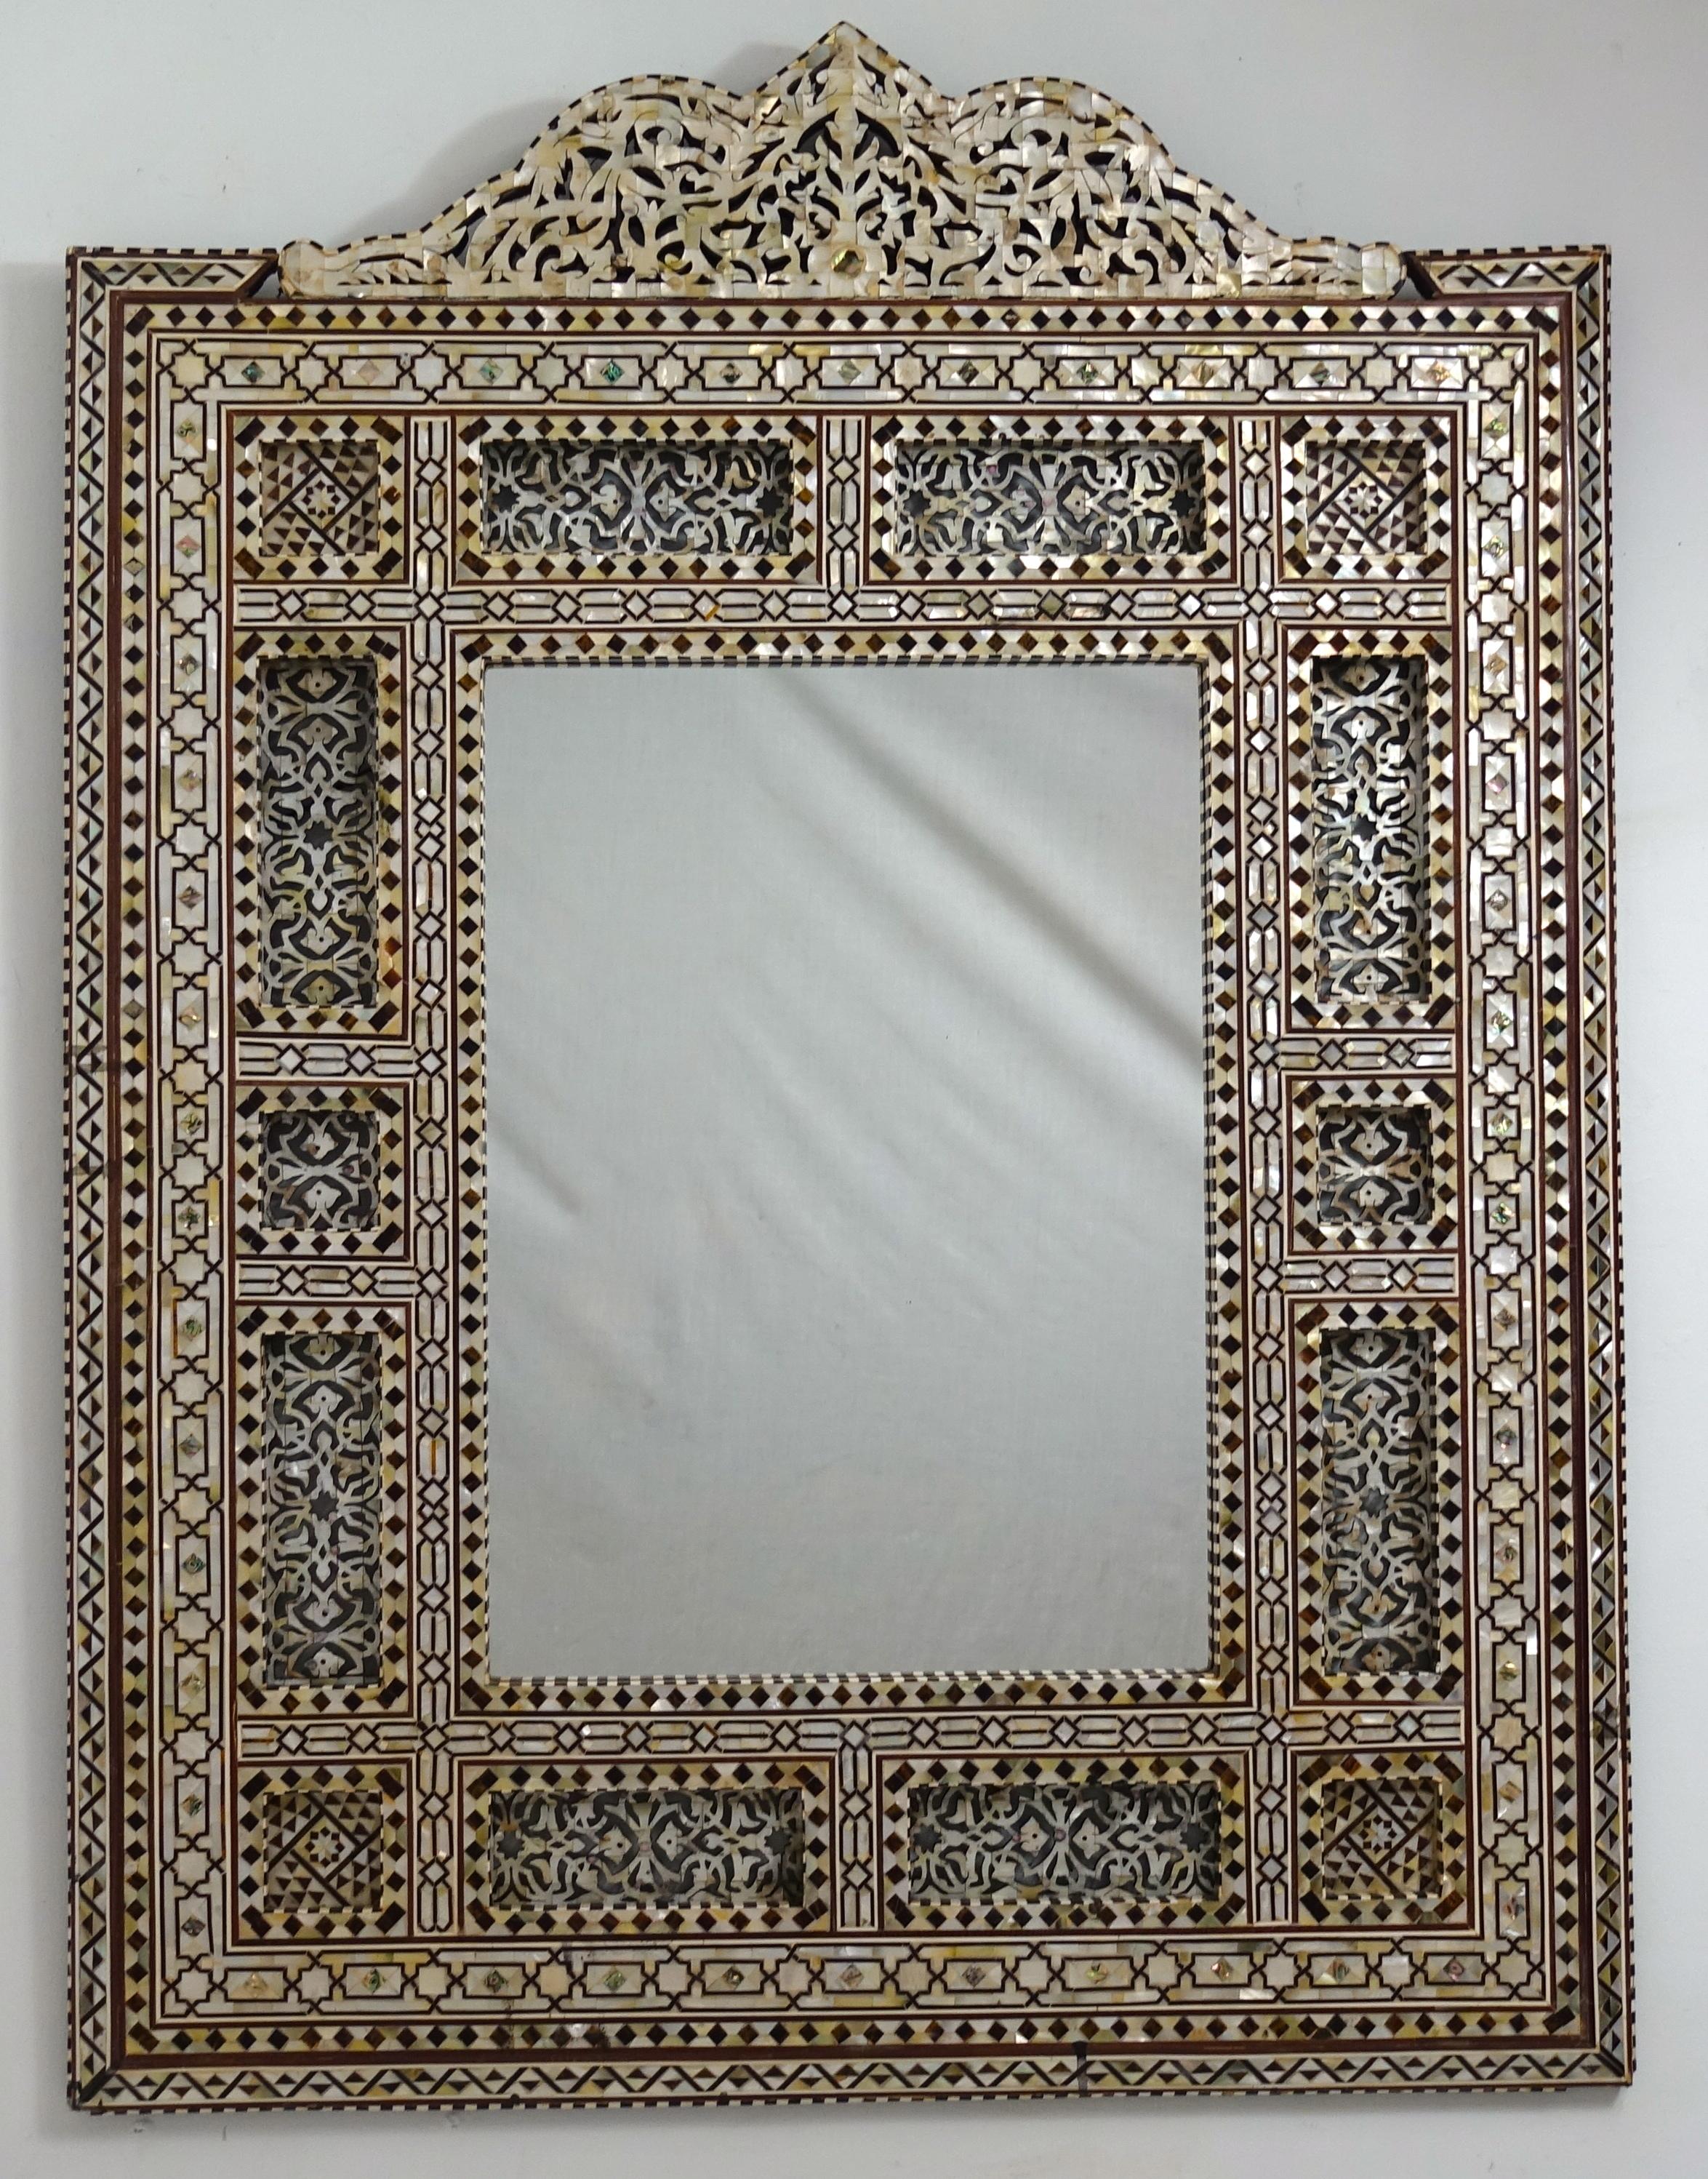 Islamic Elorborate Inlayed Syrian Frame with Mirror